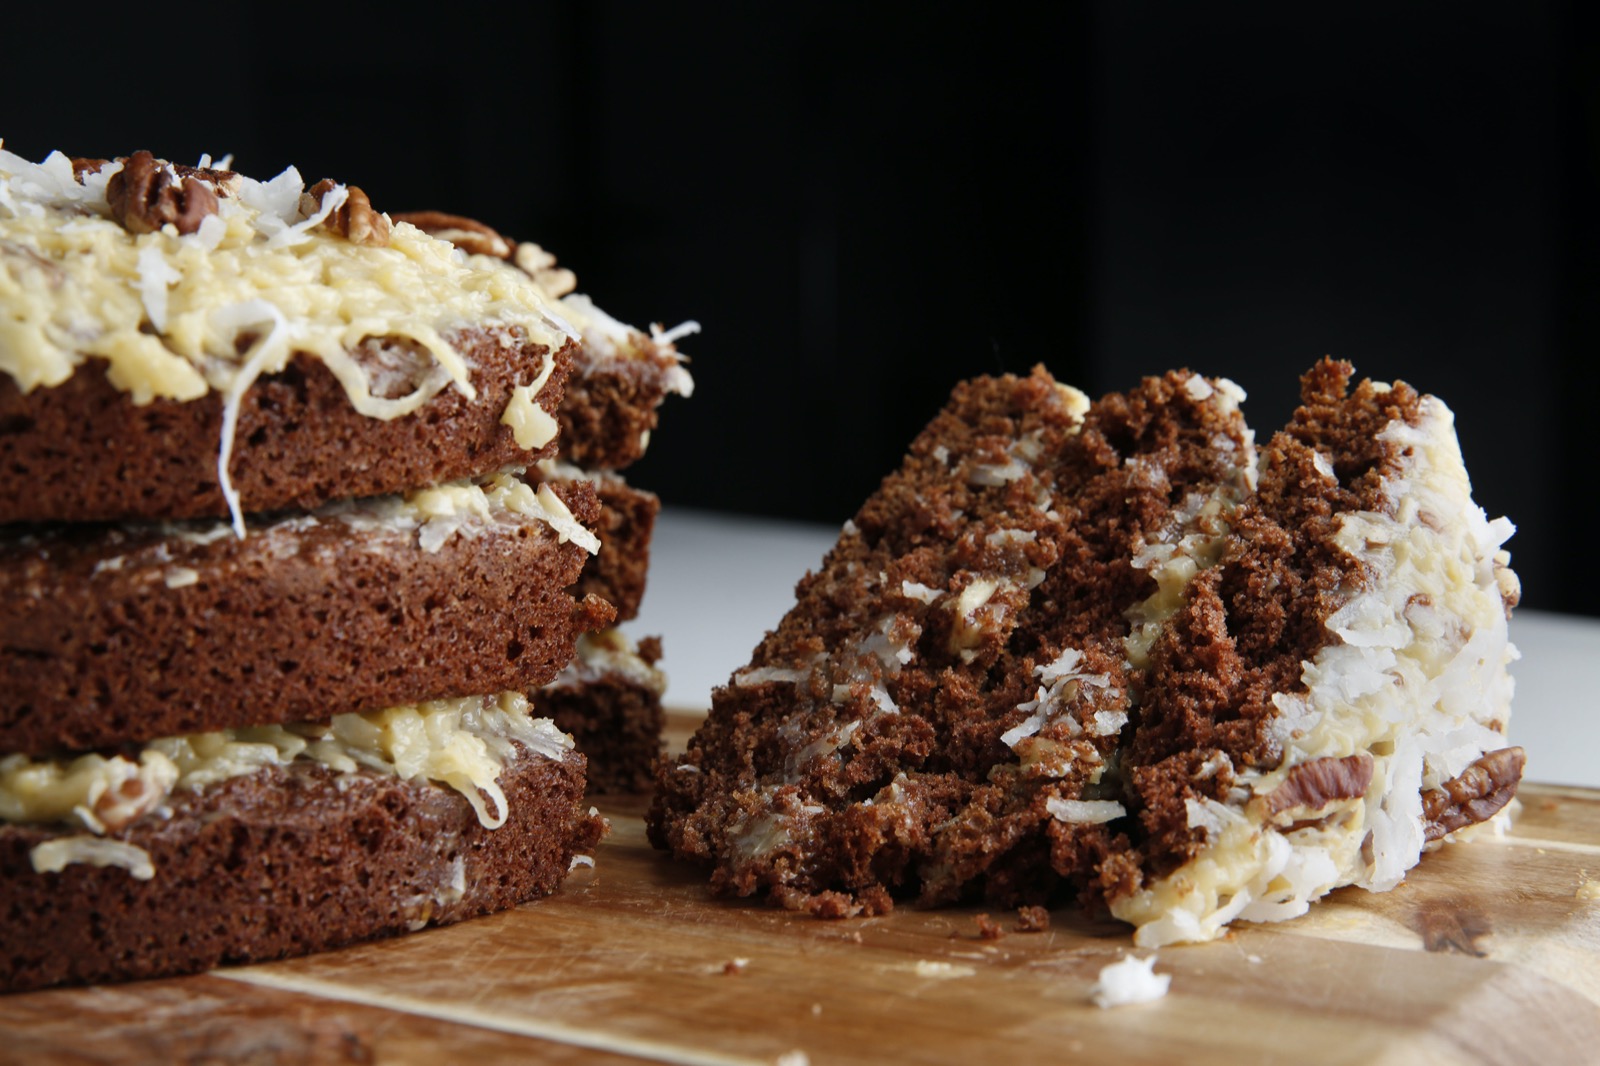 🍫 We Know Whether You’re an Introvert, Extrovert, Or Ambivert Based on How You Rate These Chocolate Desserts German Chocolate Cake